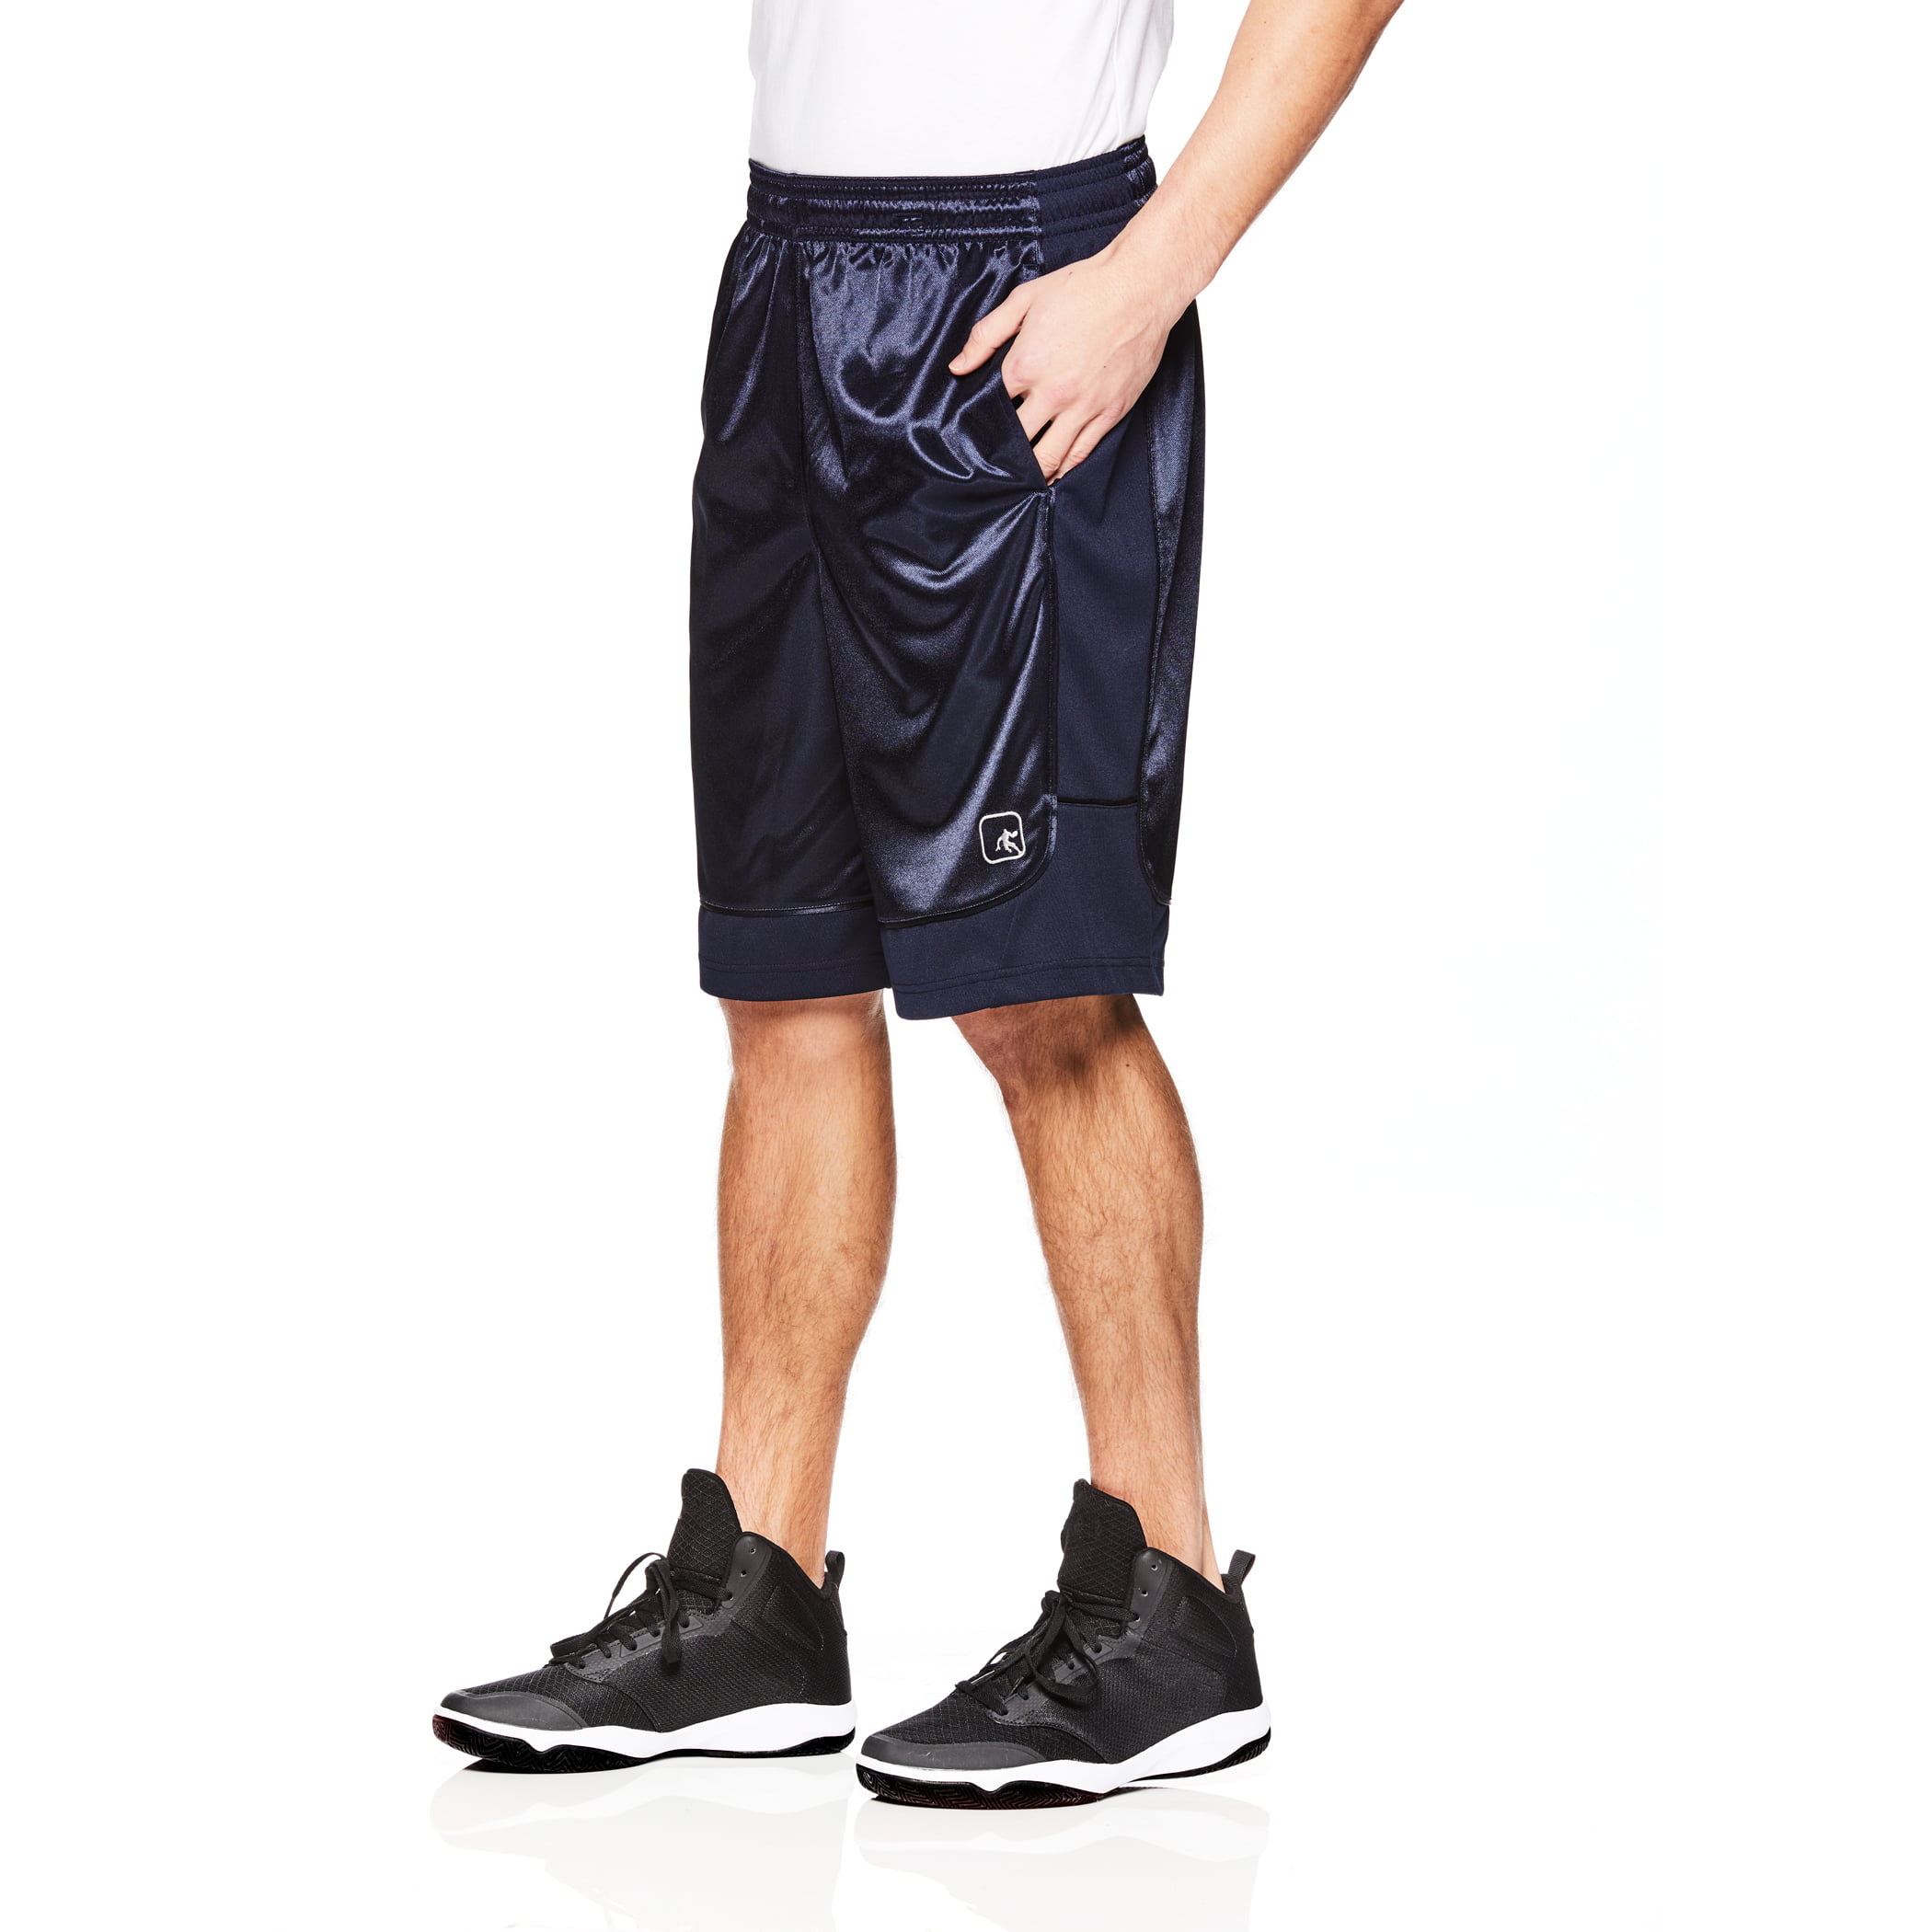 AND1 Men's All Courts Basketball Shorts 